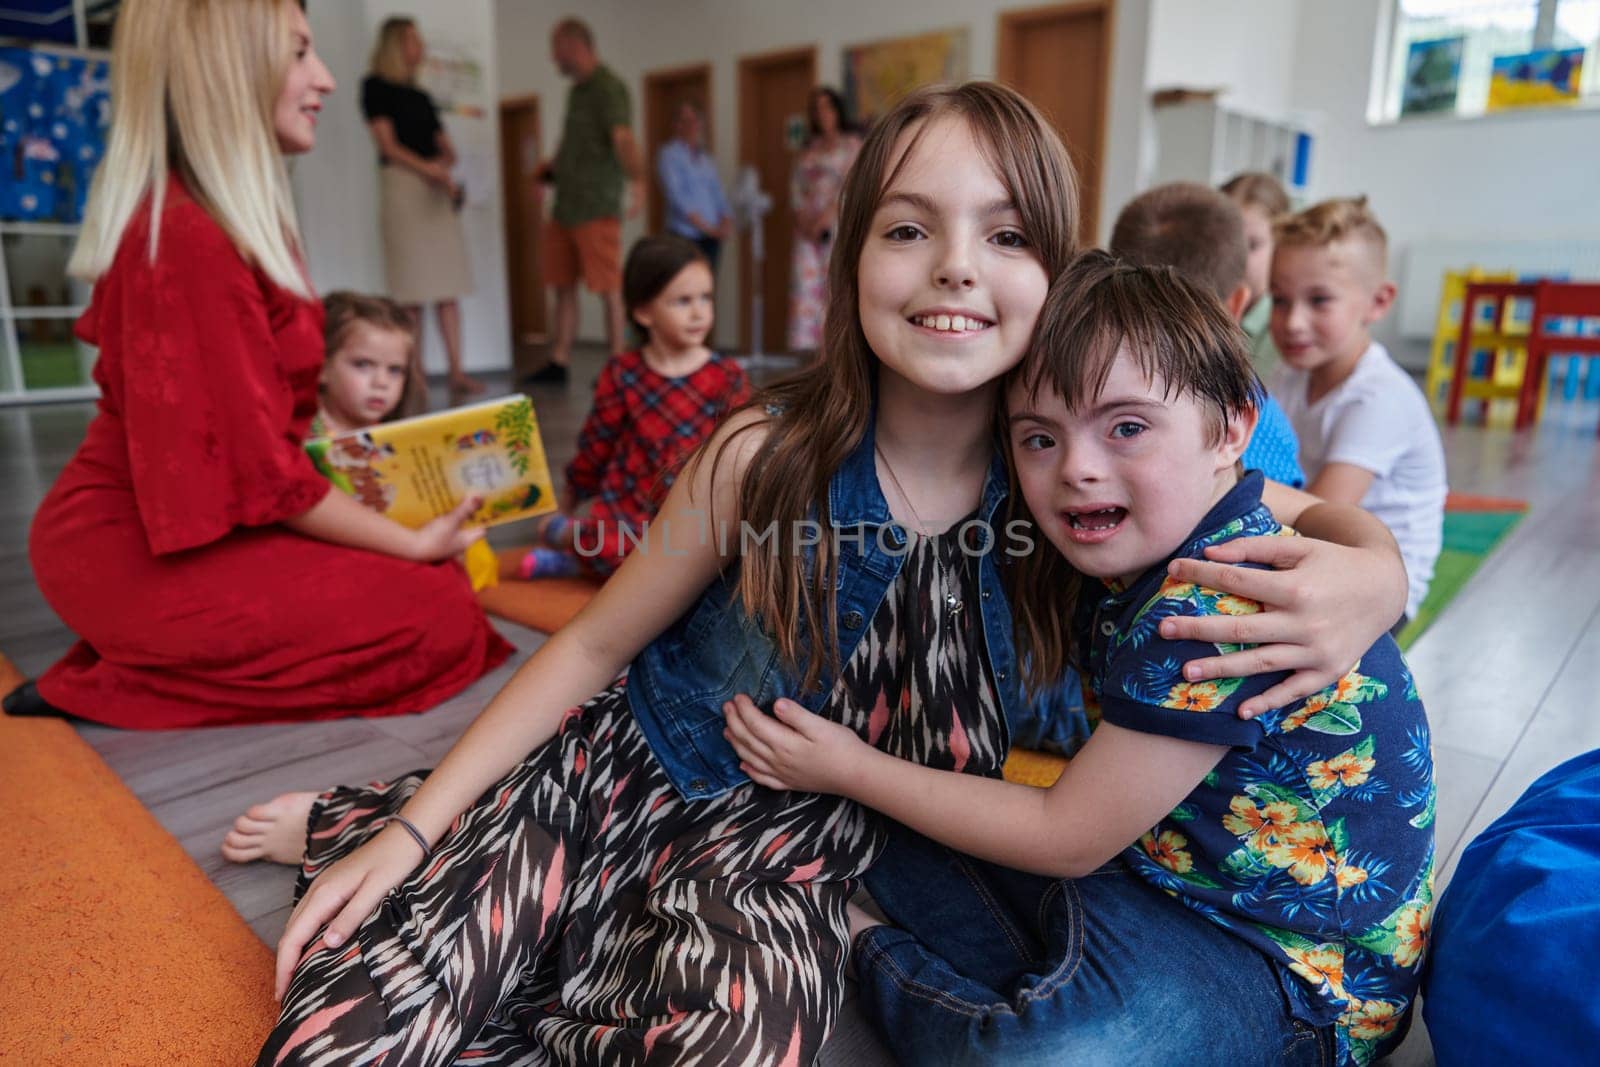 A girl and a boy with Down's syndrome in each other's arms spend time together in a preschool institution by dotshock